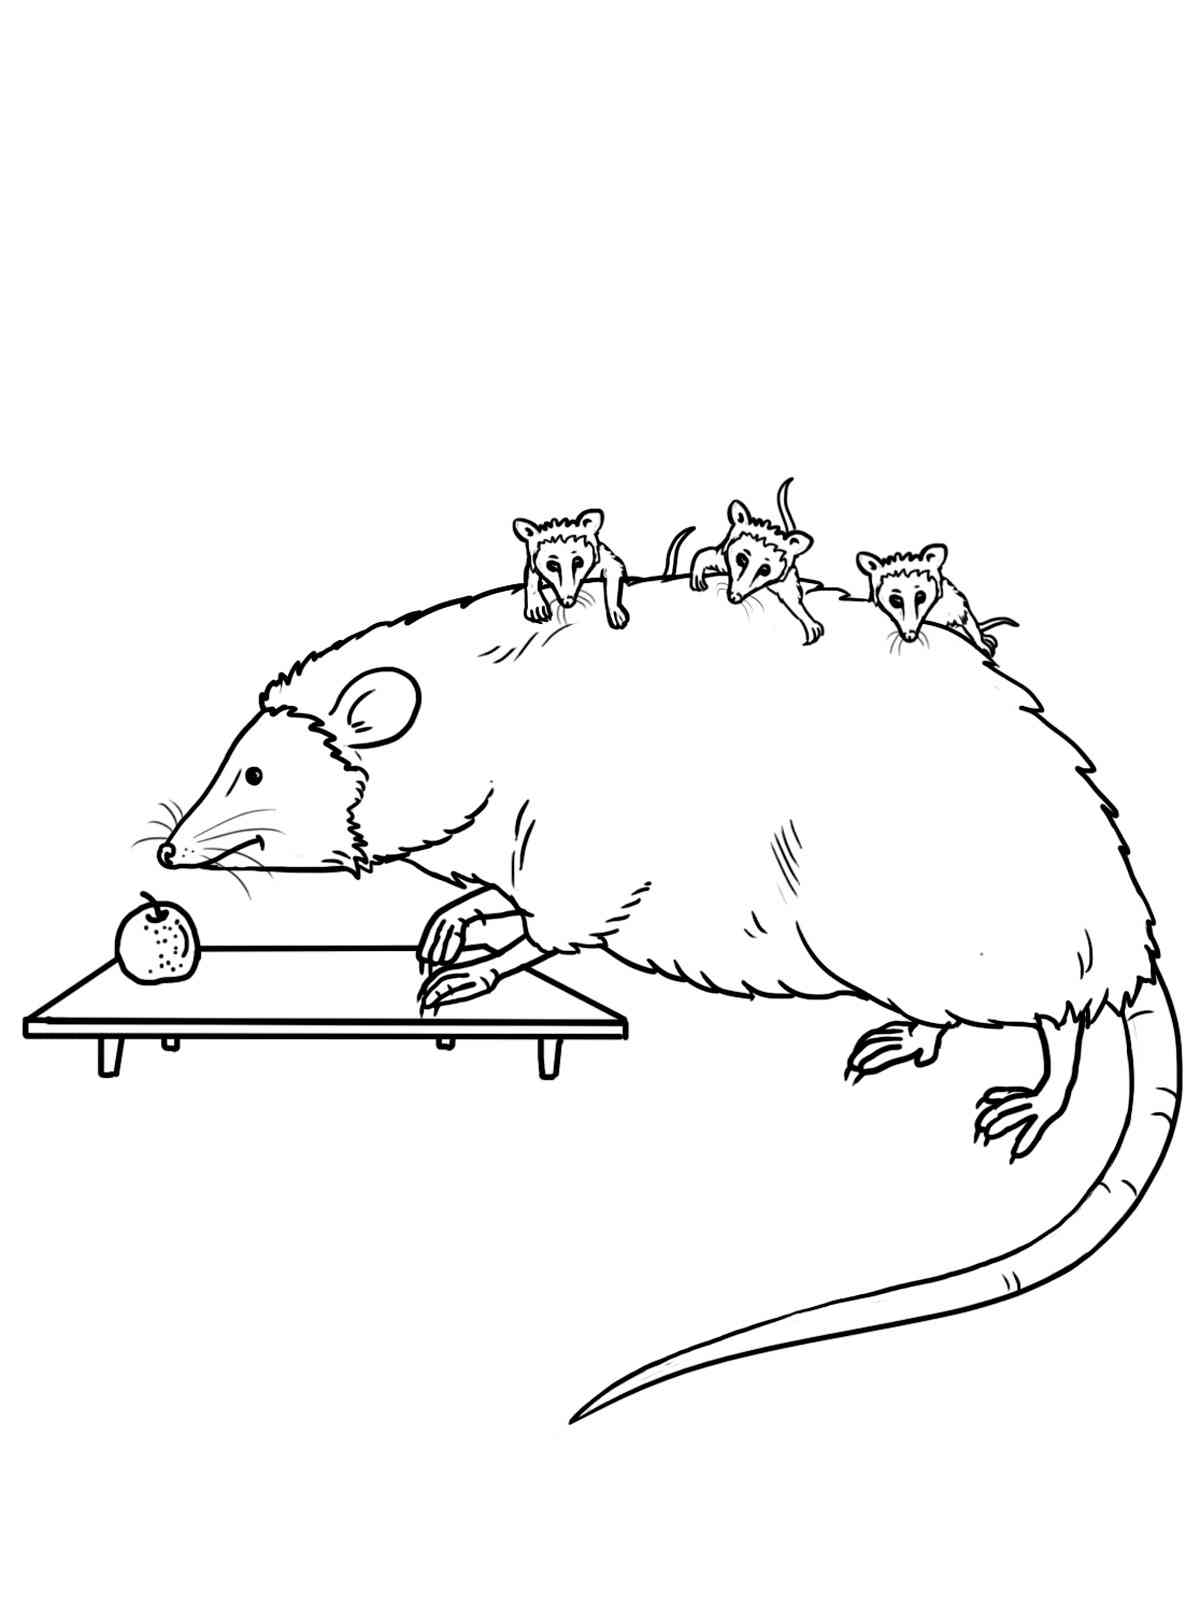 Opossum with cubs on his back coloring page